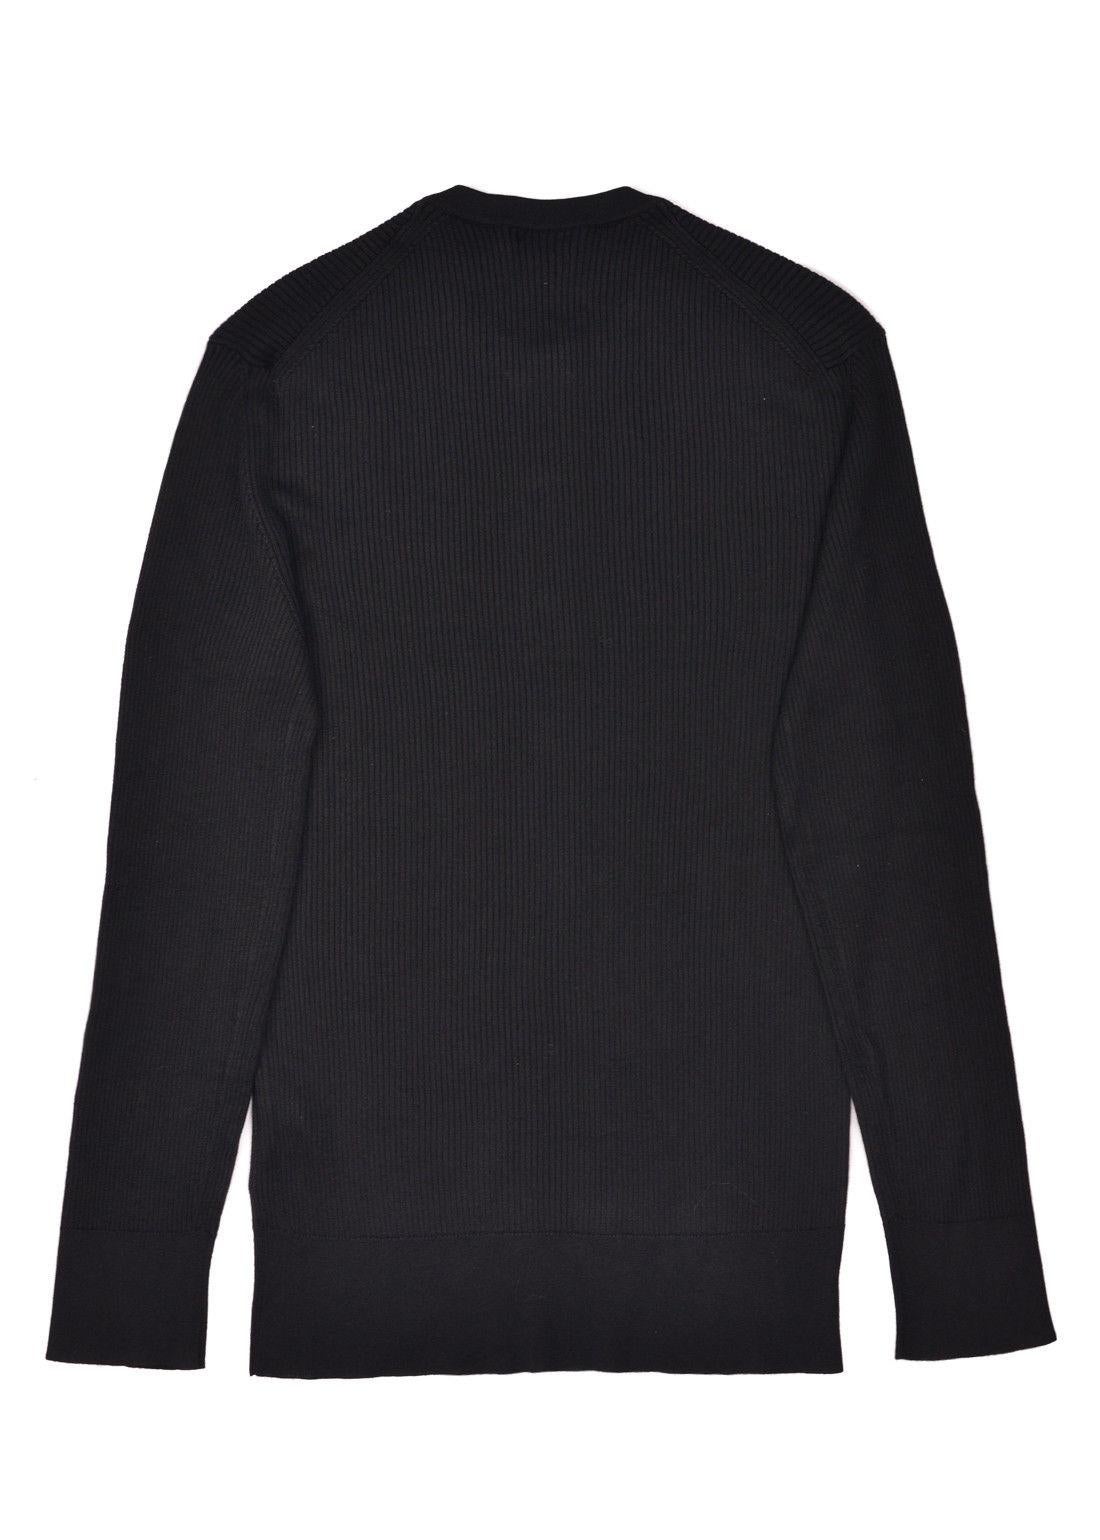 Tom Ford Mens Black Cashmere Blend Henley Ribbed Sweater Size IT52/US42~RTL$1710 In New Condition For Sale In Brooklyn, NY